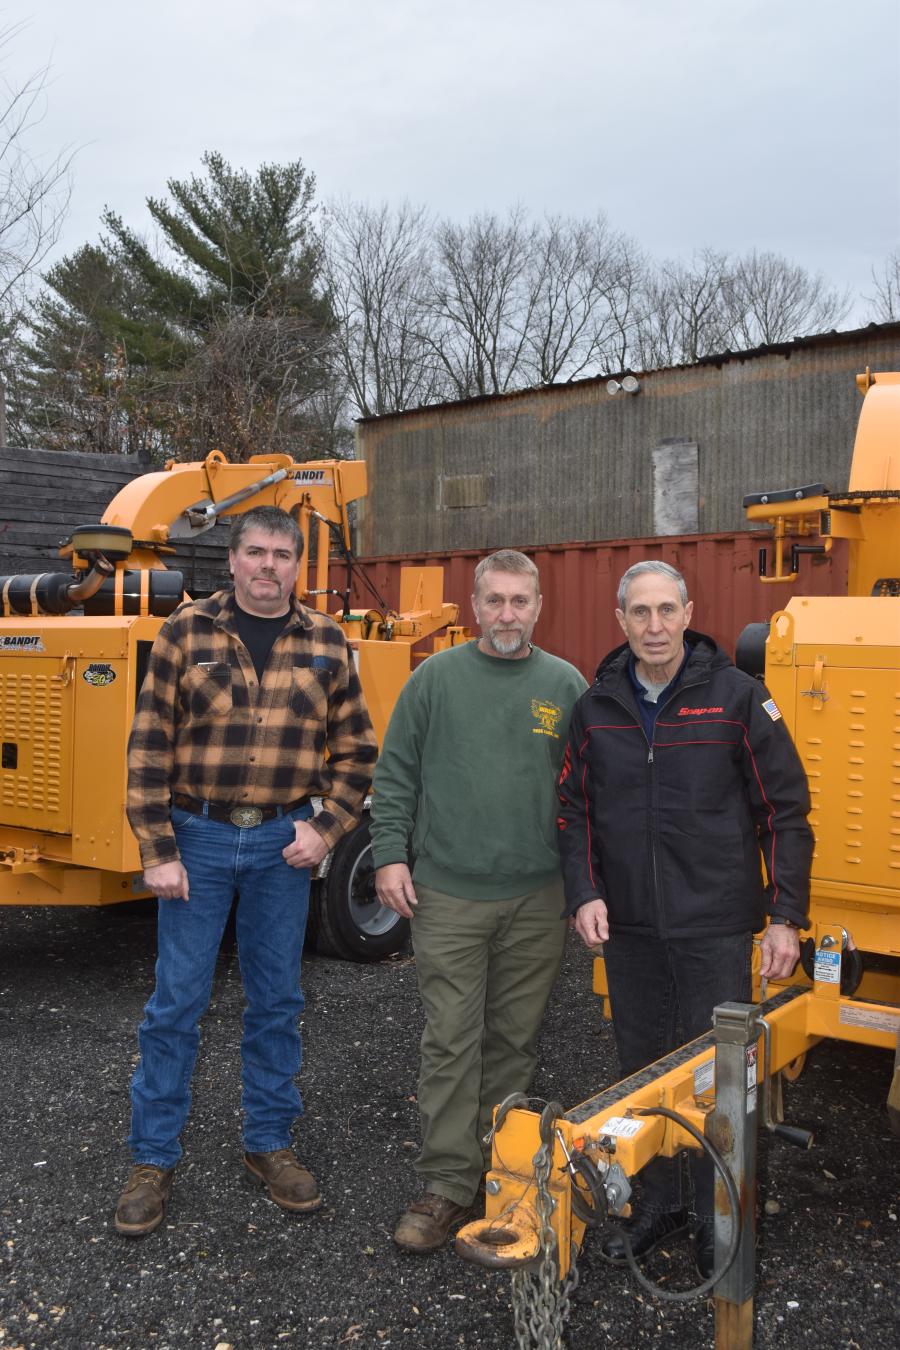 (L-R) are Dennis Gallagher, sales representative of Westchester Tractor; Edward Wade, president of Wade Tree Care Inc.; and Frank Labarbera, retired of Westchester Tractor.
(CEG photo)